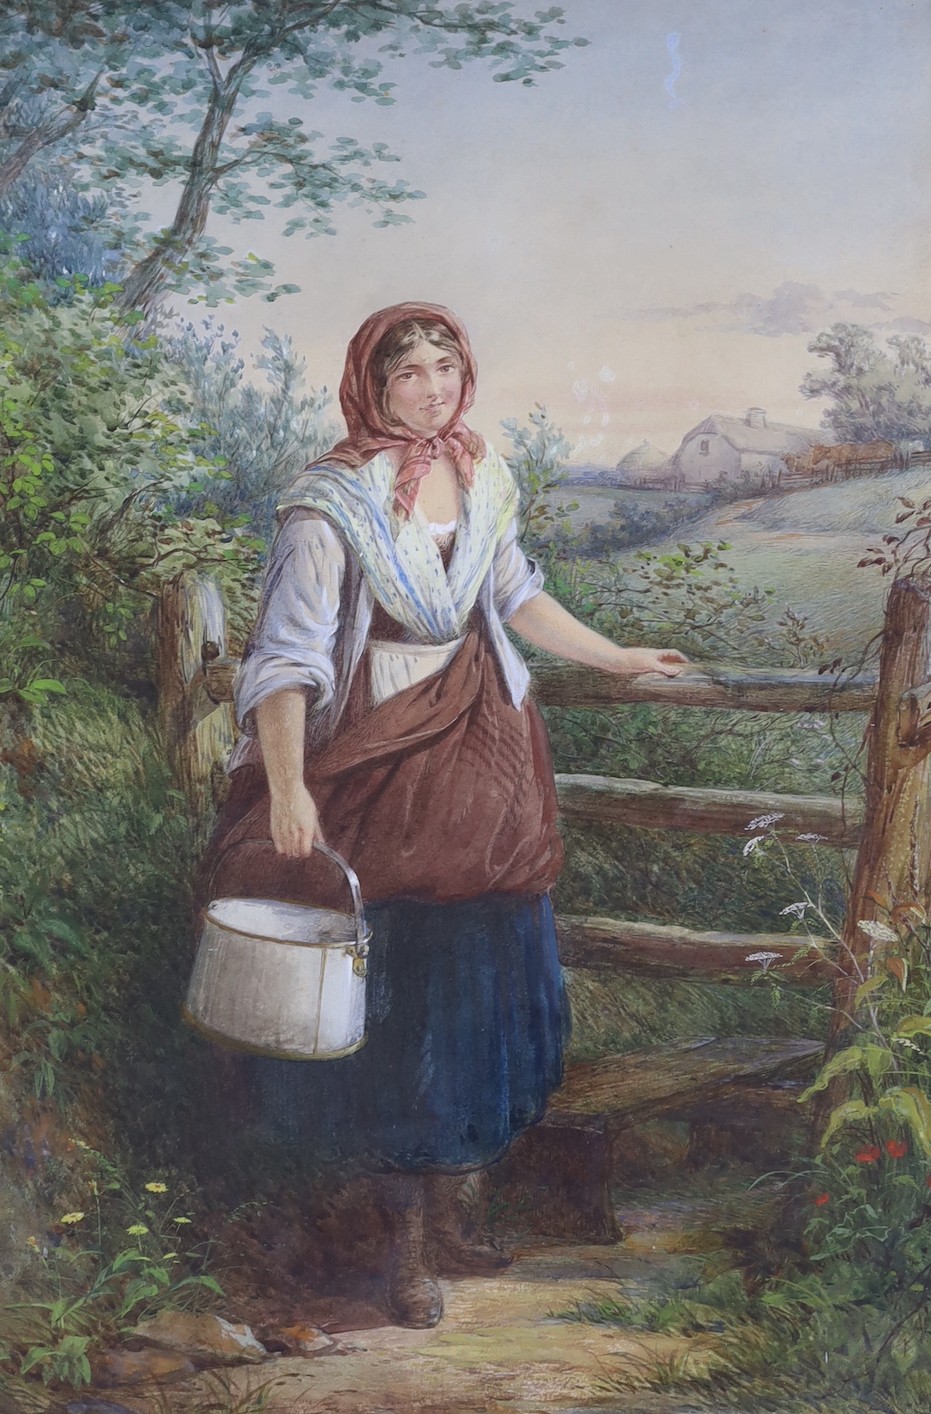 David Hardy (fl.1855-1870), watercolour, County maid beside a stile, signed and dated 1865, 54 x 36cm